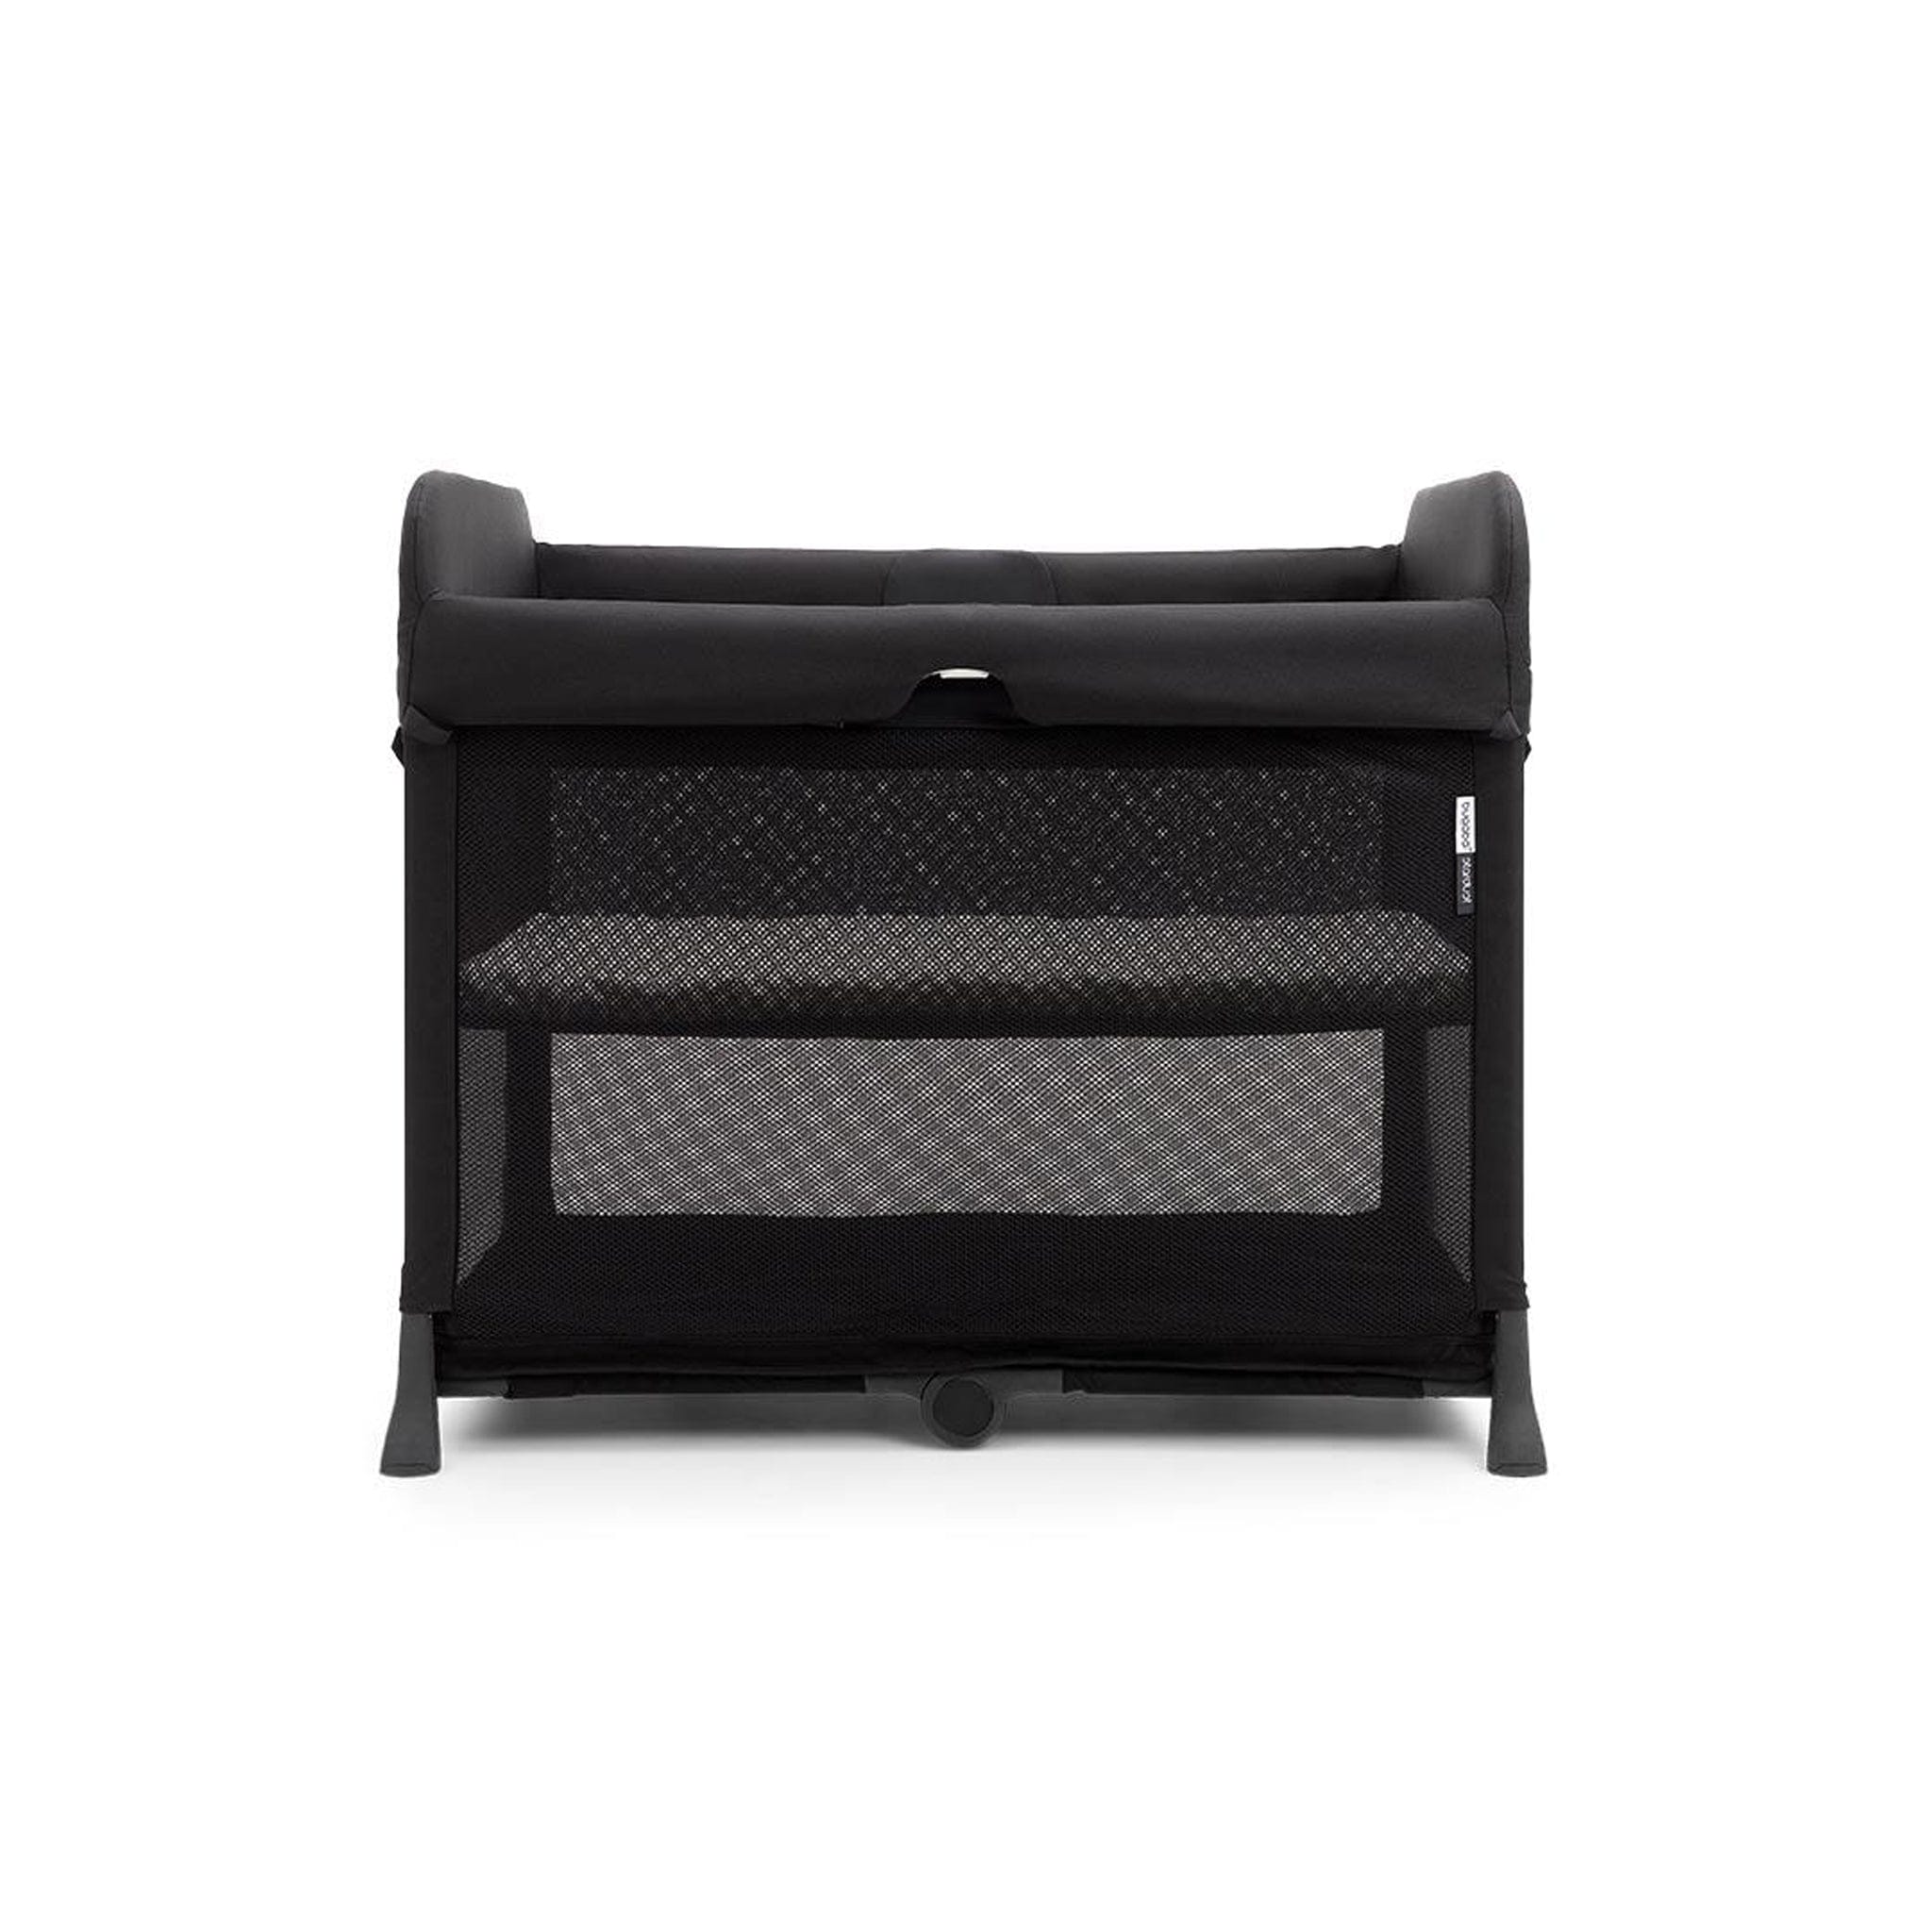 Bugaboo travel cots Bugaboo Stardust Travel Cot in Black 952000ZW01